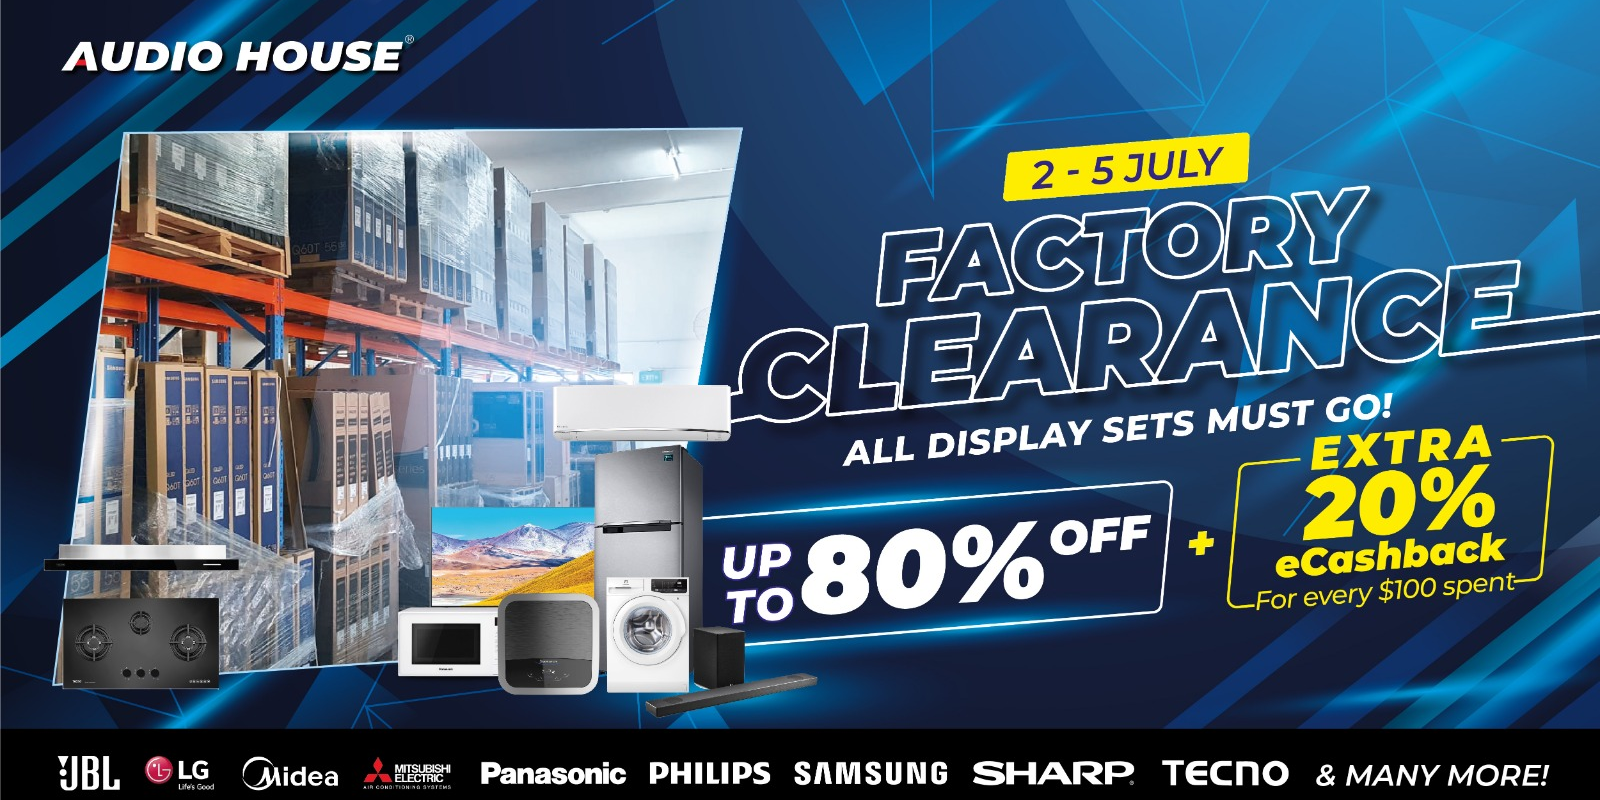 [Audio House Factory Clearance Sale] Enjoy Up to 80% OFF + 20% eCashback For Every $100 Spent!